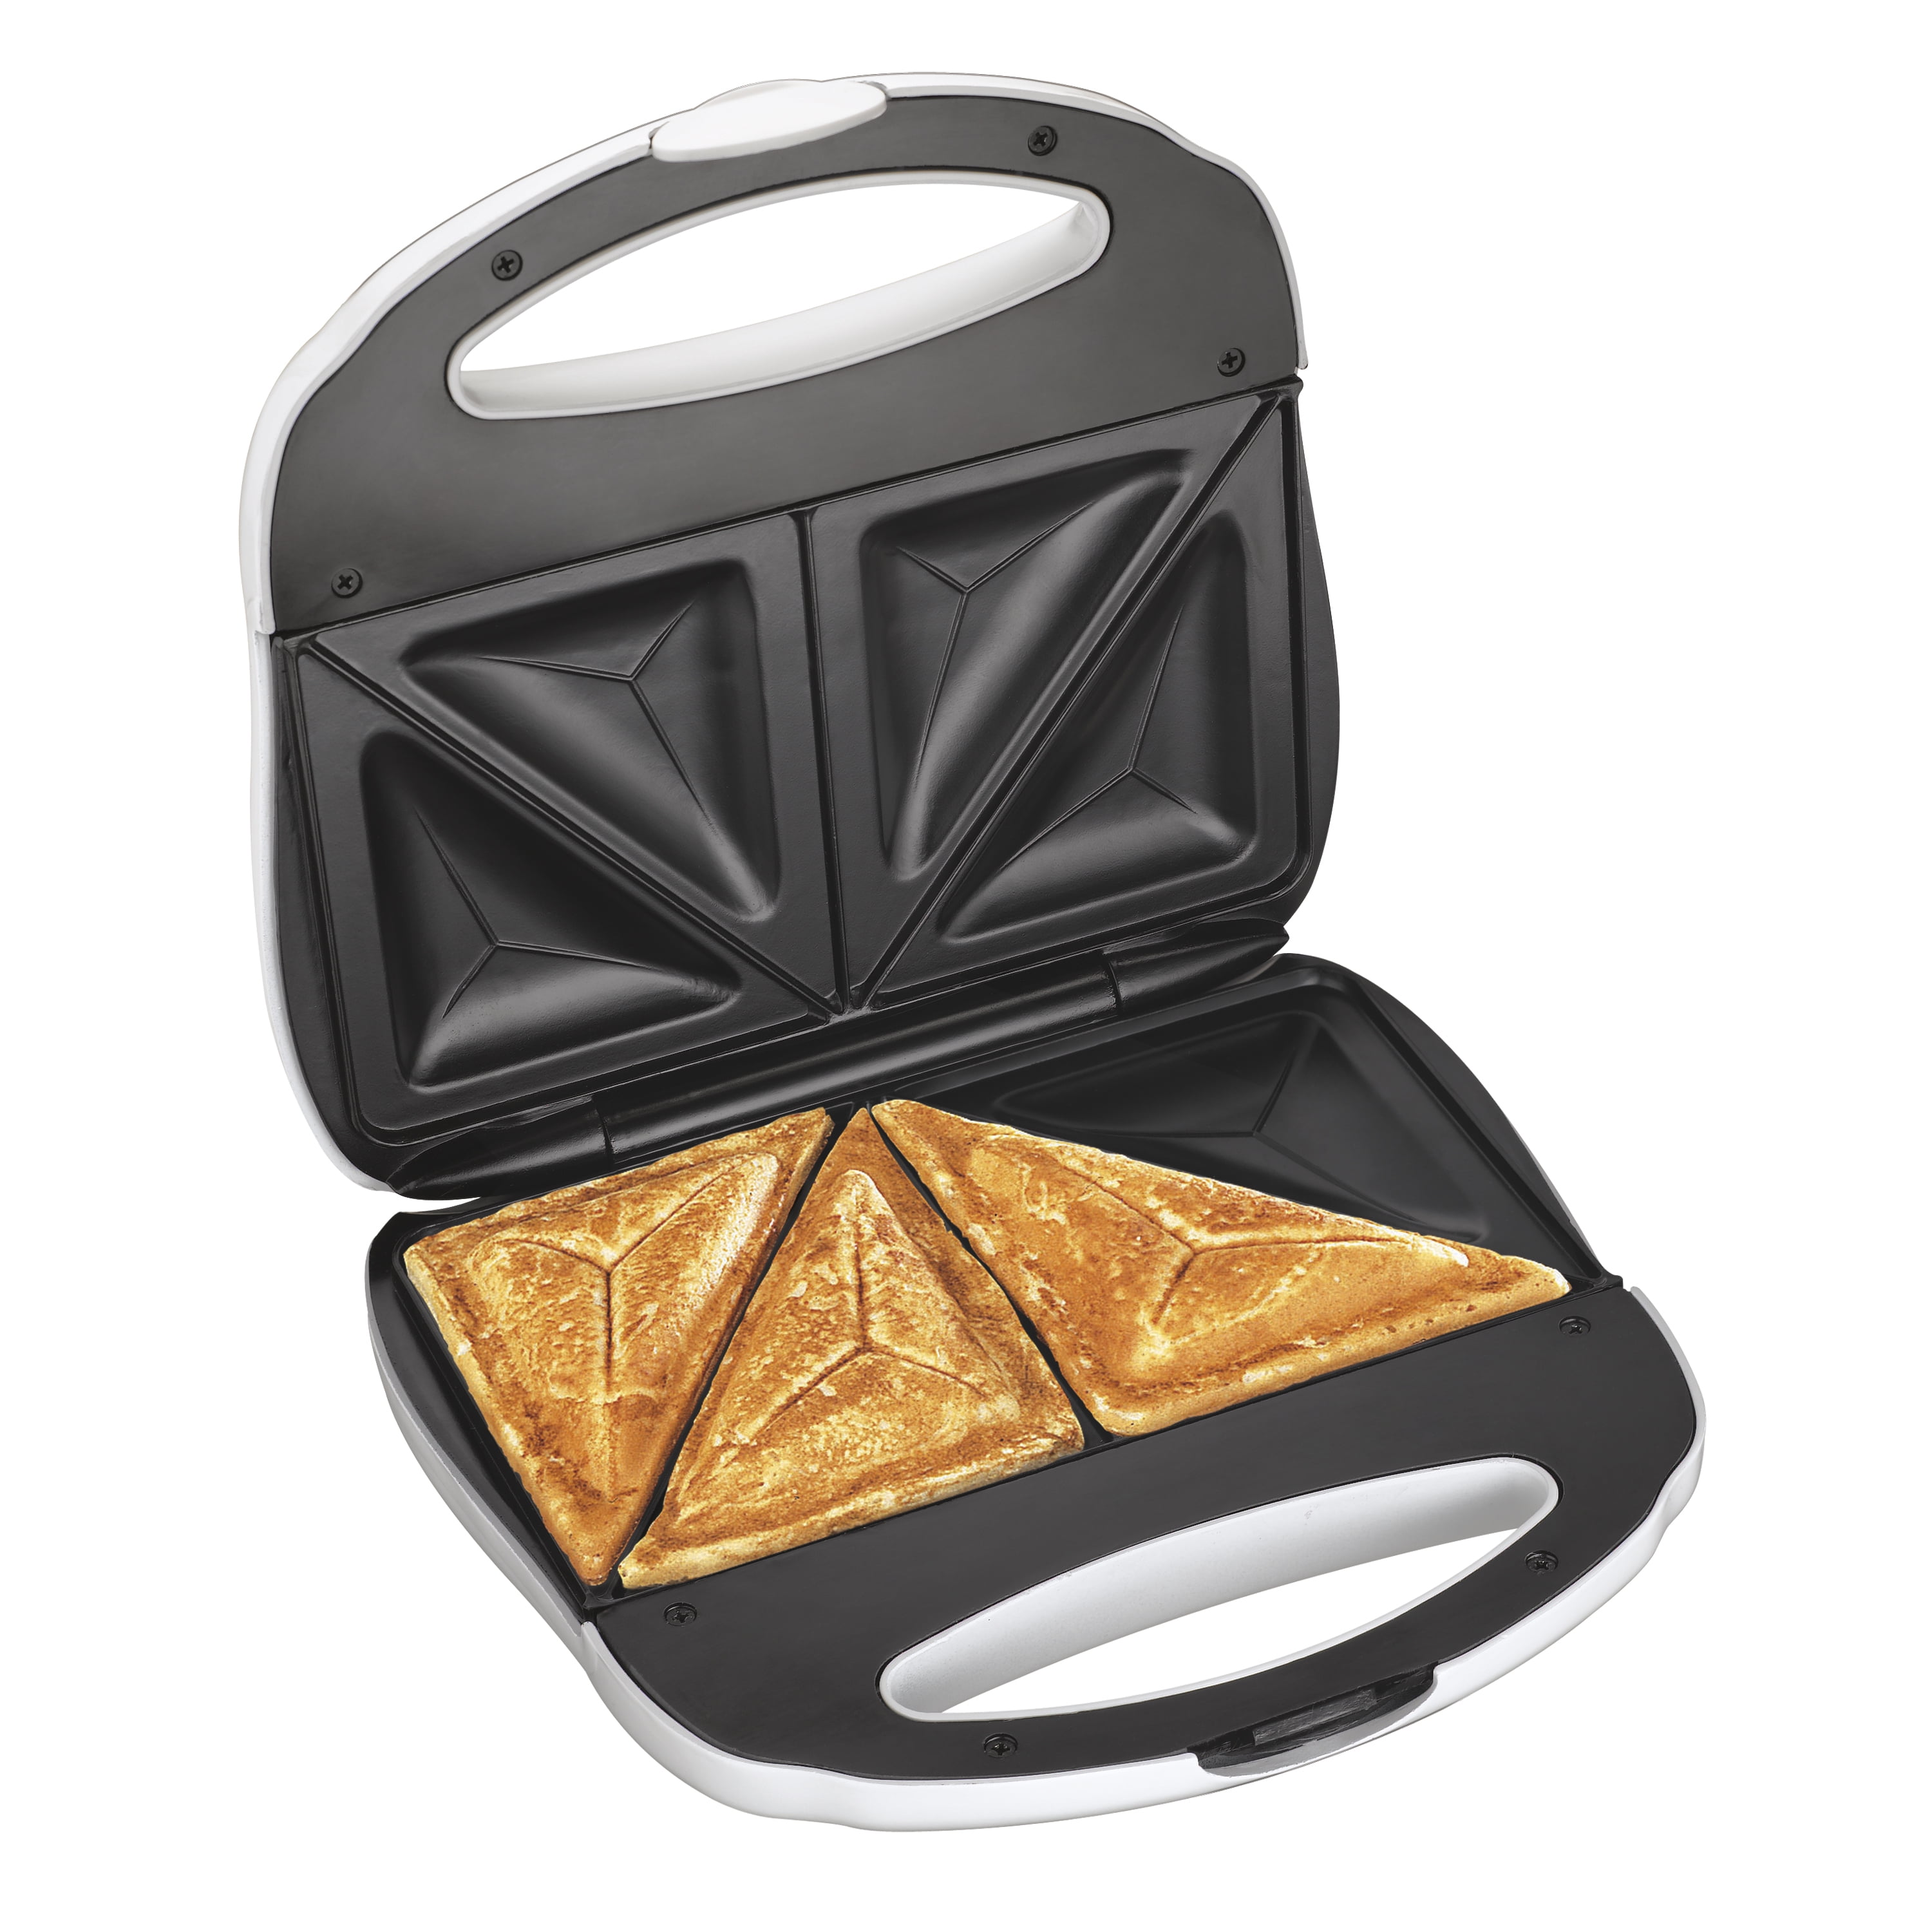 Bread Maker, Toaster, Small Size Versatile ABS Fast Heating Maker Easy To  Store And Carry for Paninis Burgers Steaks Sandwiches